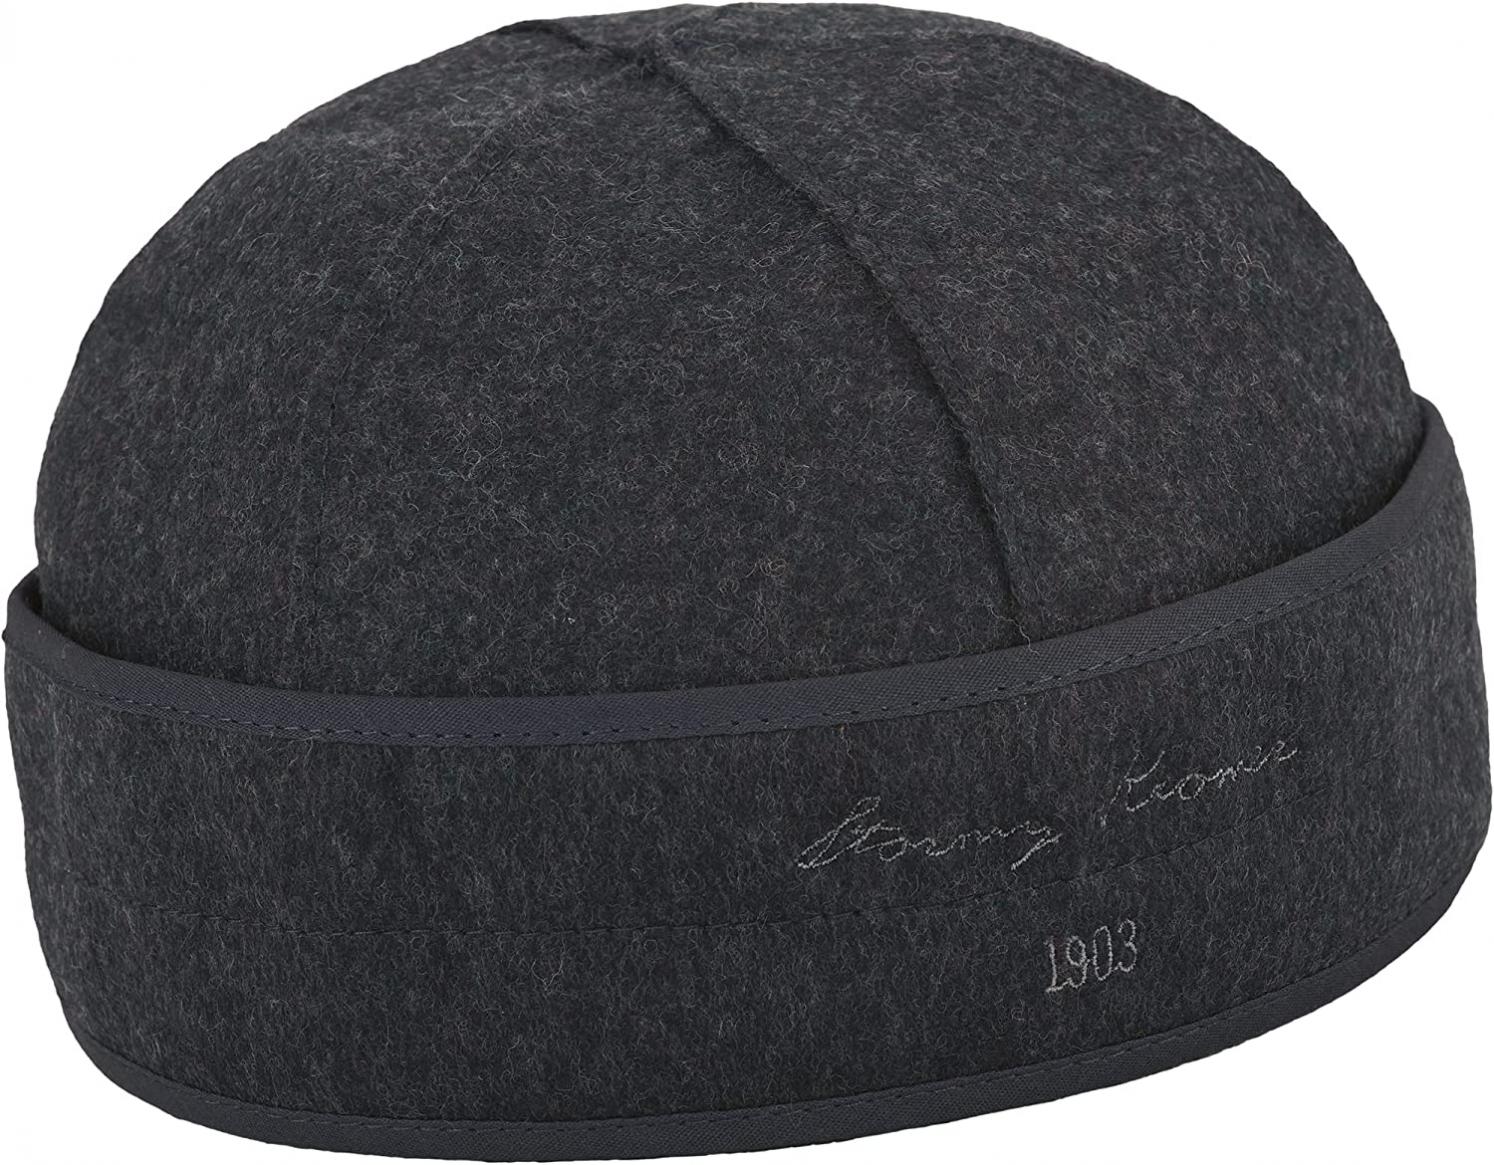 Stormy Kromer The Brimless Cap - Wool Thermal Cap with Pulldown Earband, Cold Weather Gear, Warm